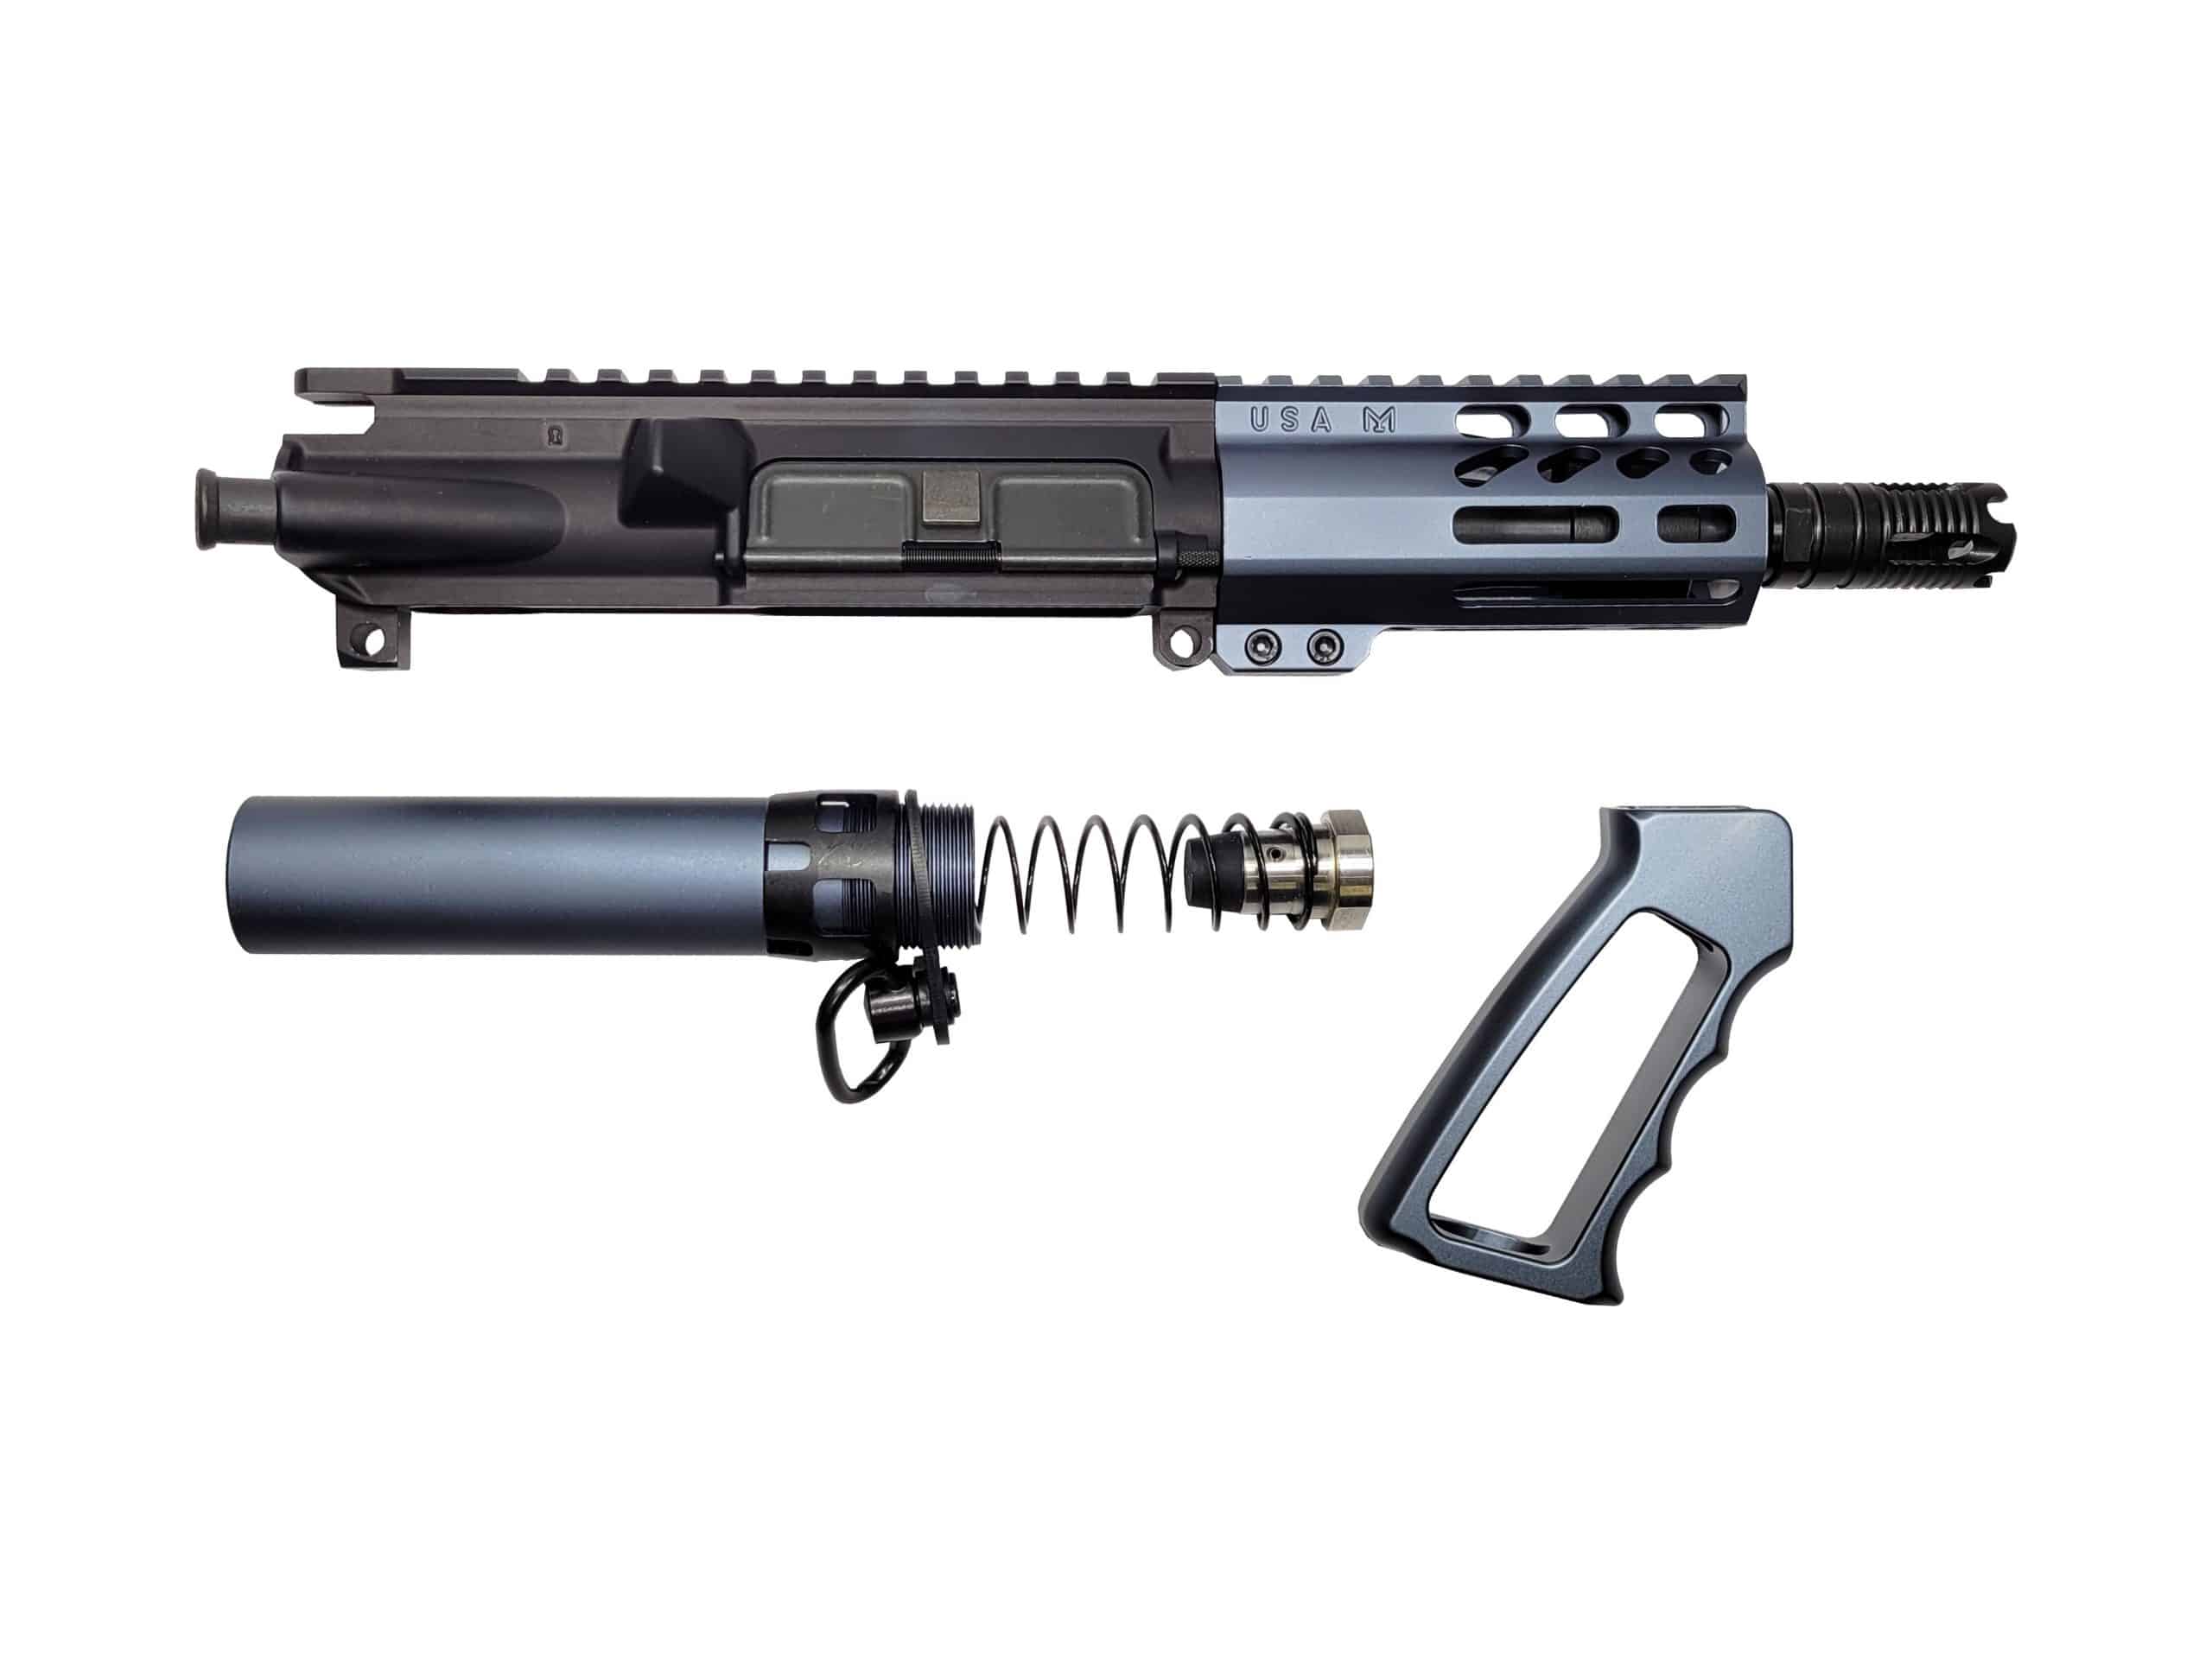 5.56 caliber AR15 micro pistol upper assembly in anodized grey.